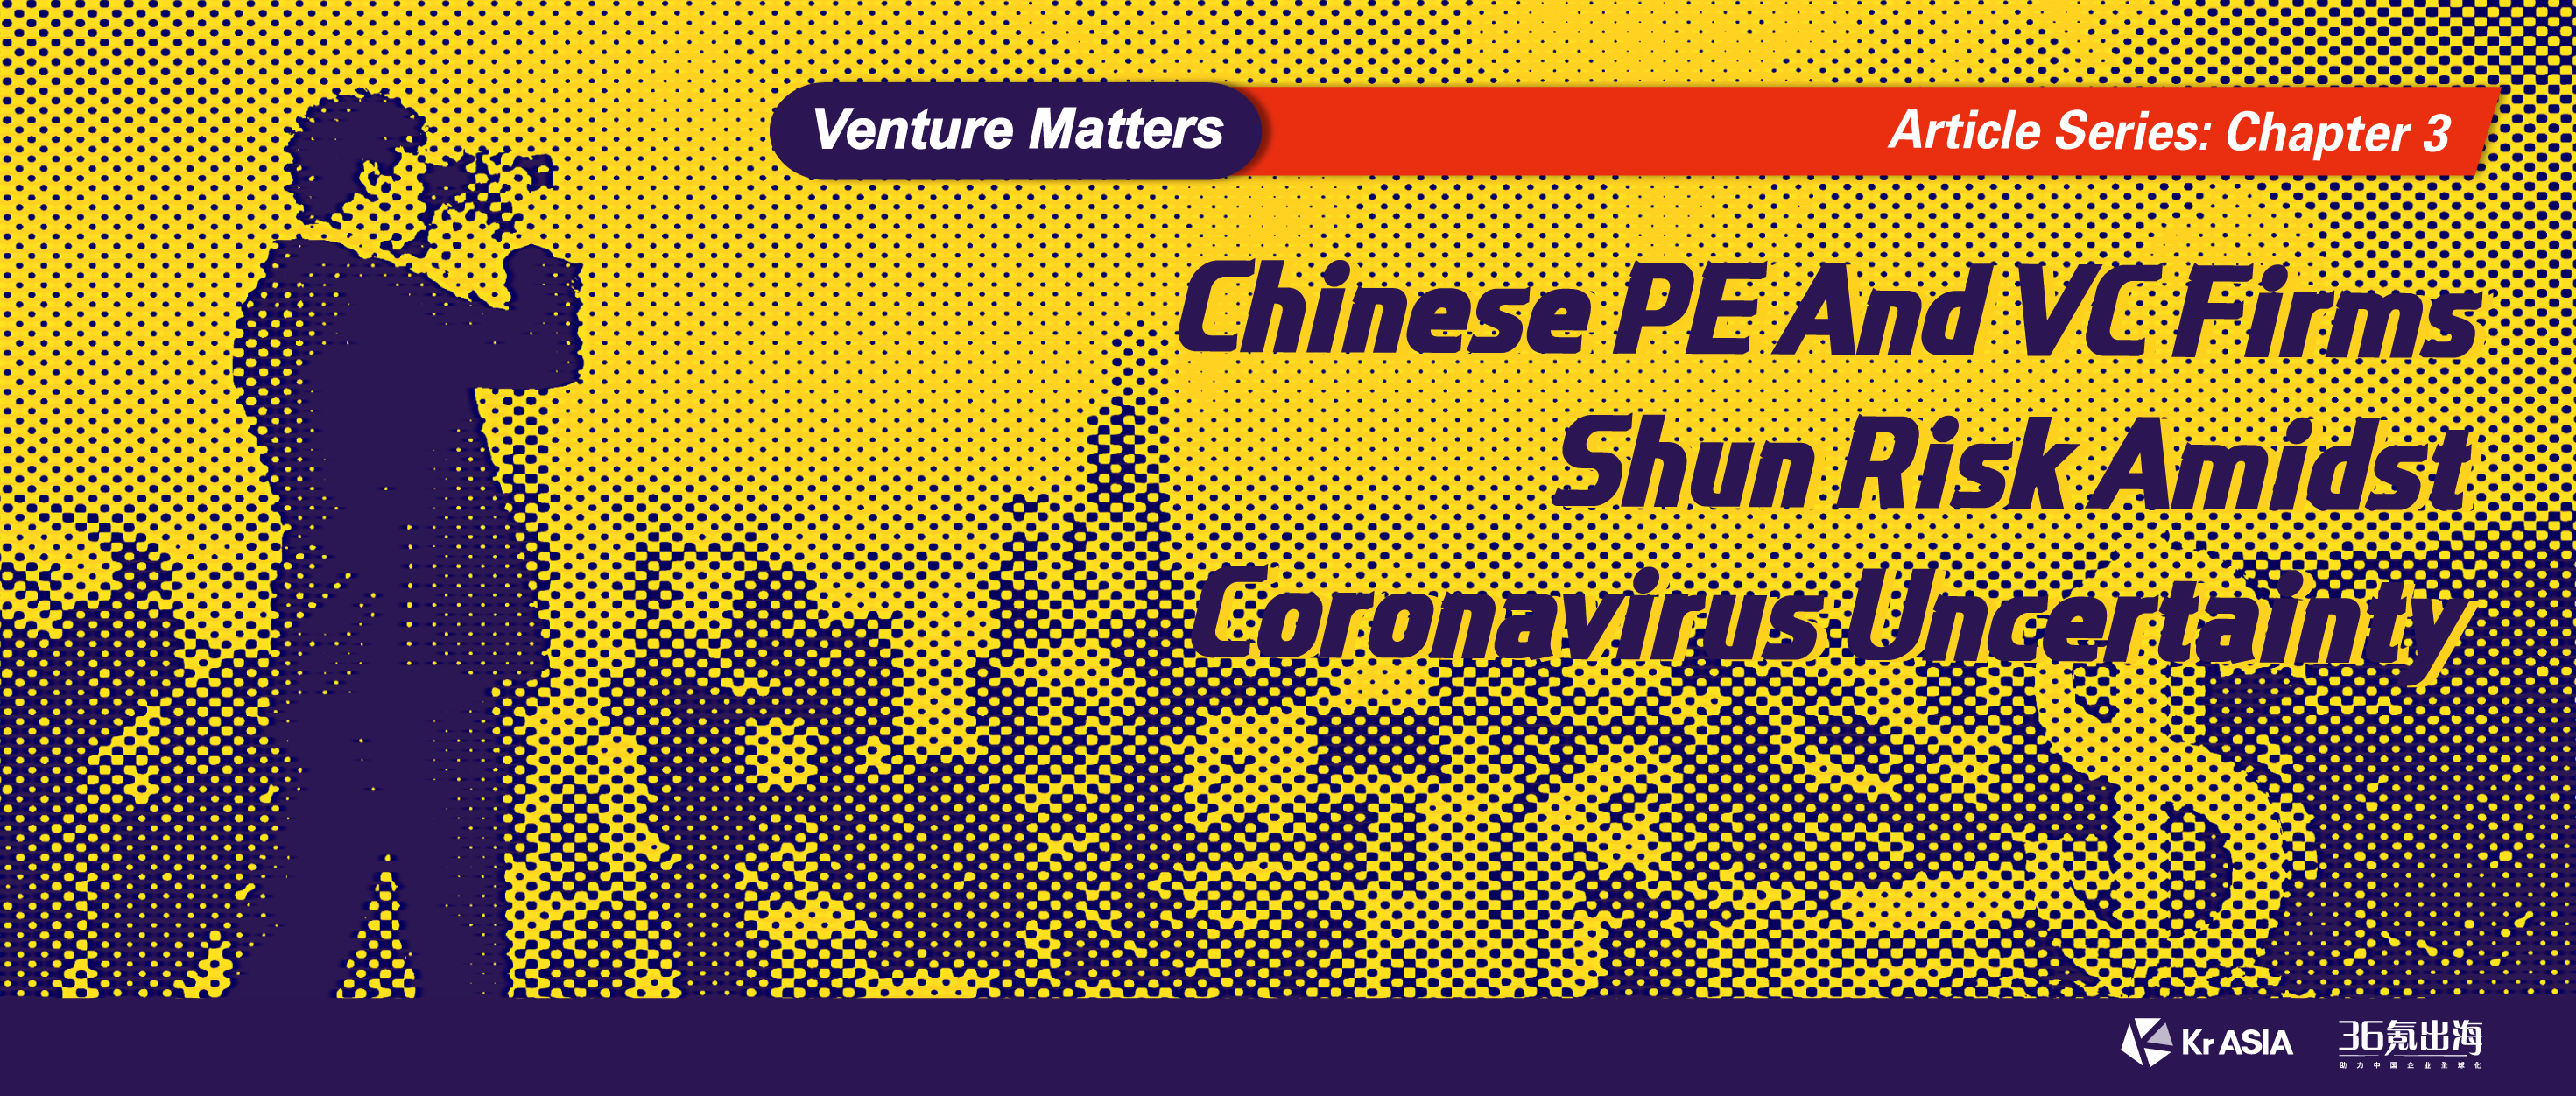 Chinese PE and VC Firms shun risk amidst coronavirus uncertainty